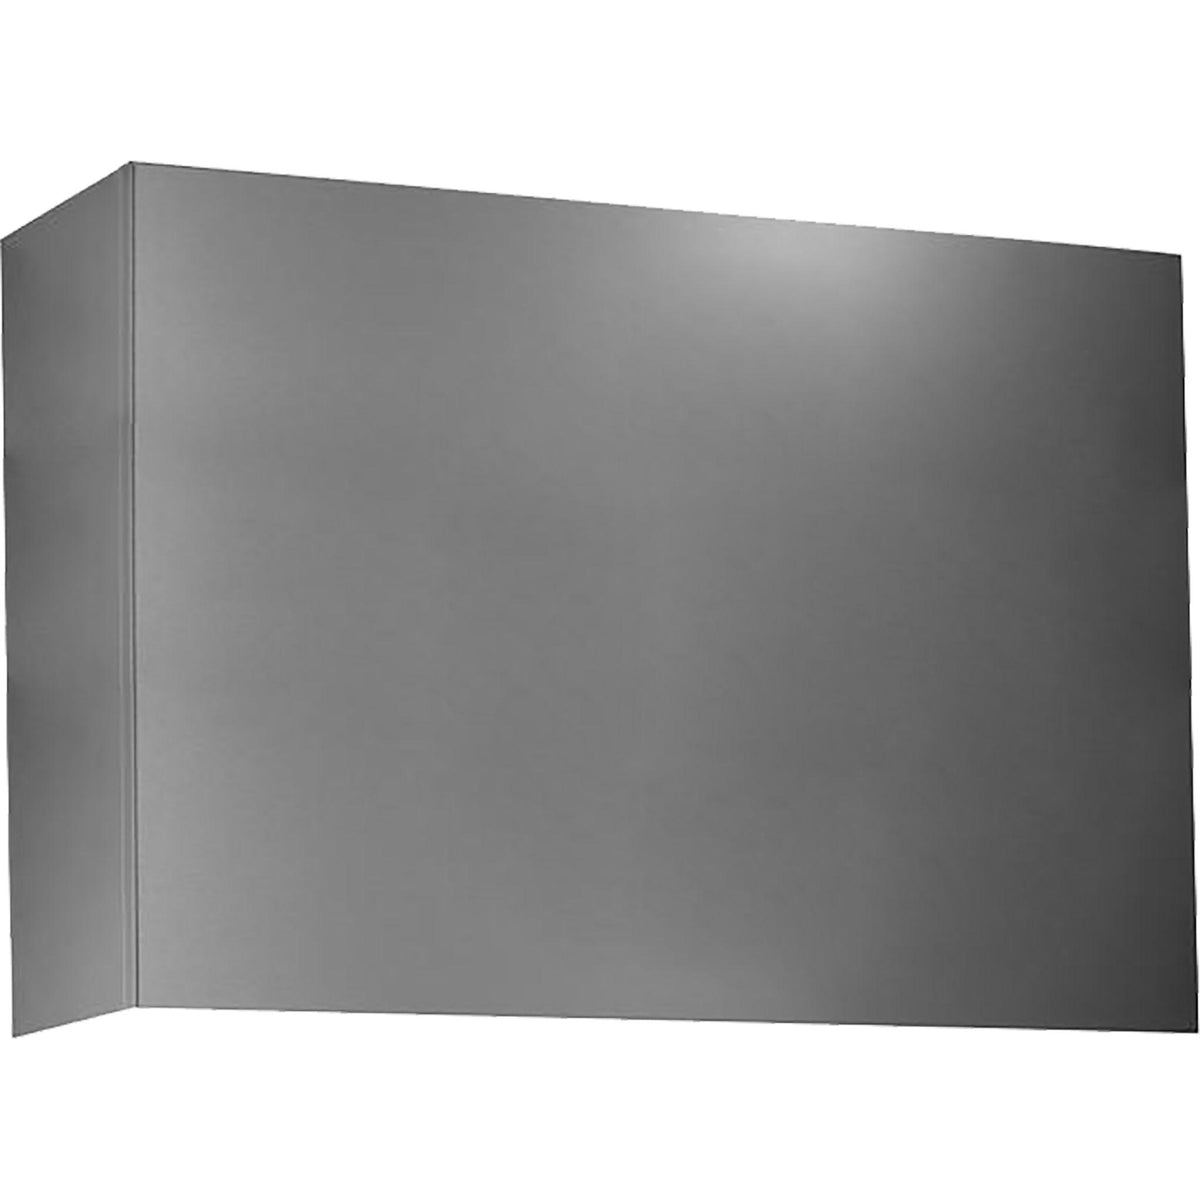 Zephyr 48 x 24-inch Duct Cover AK1728 IMAGE 1